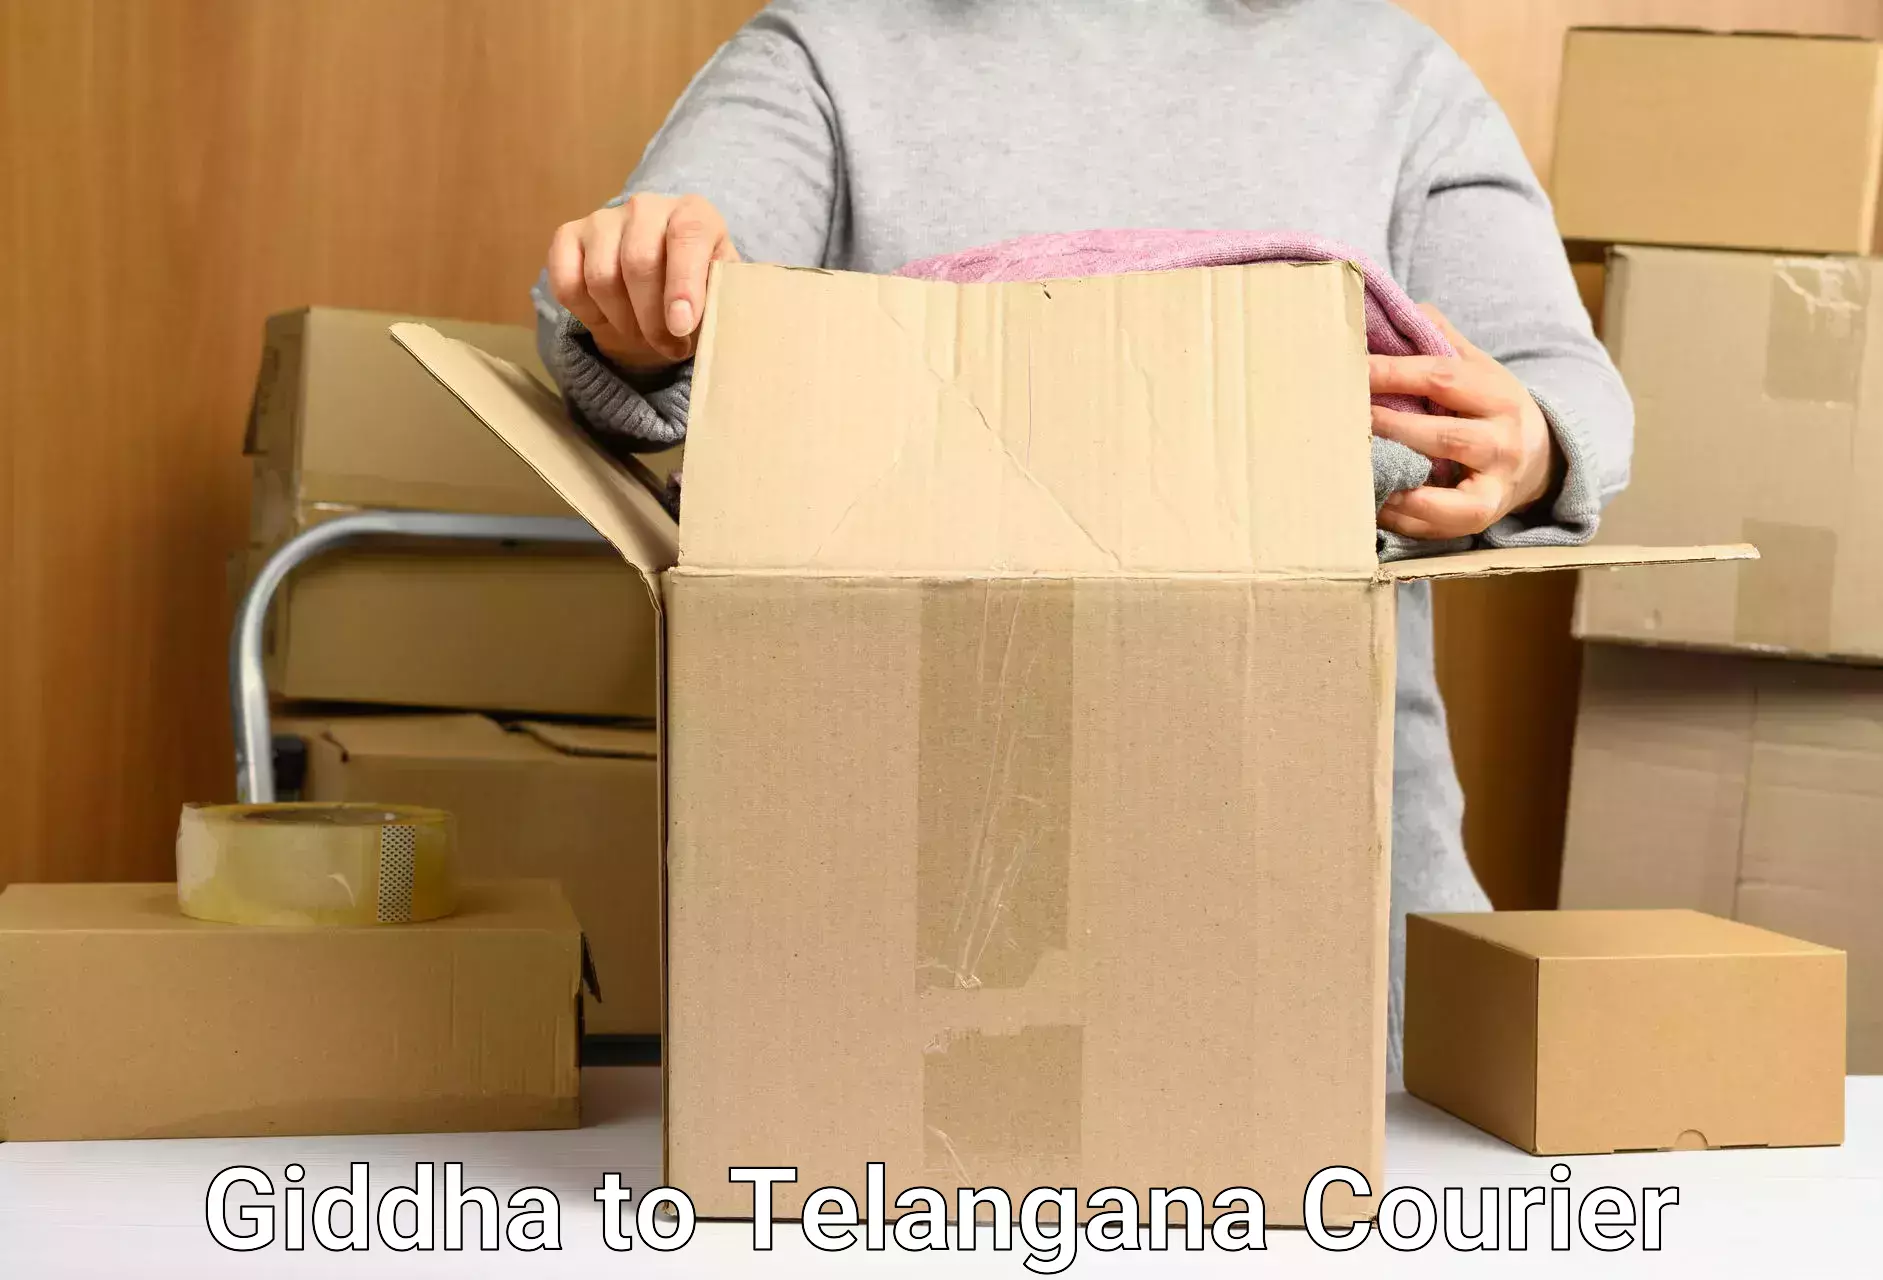 Affordable parcel rates Giddha to Cheyyur